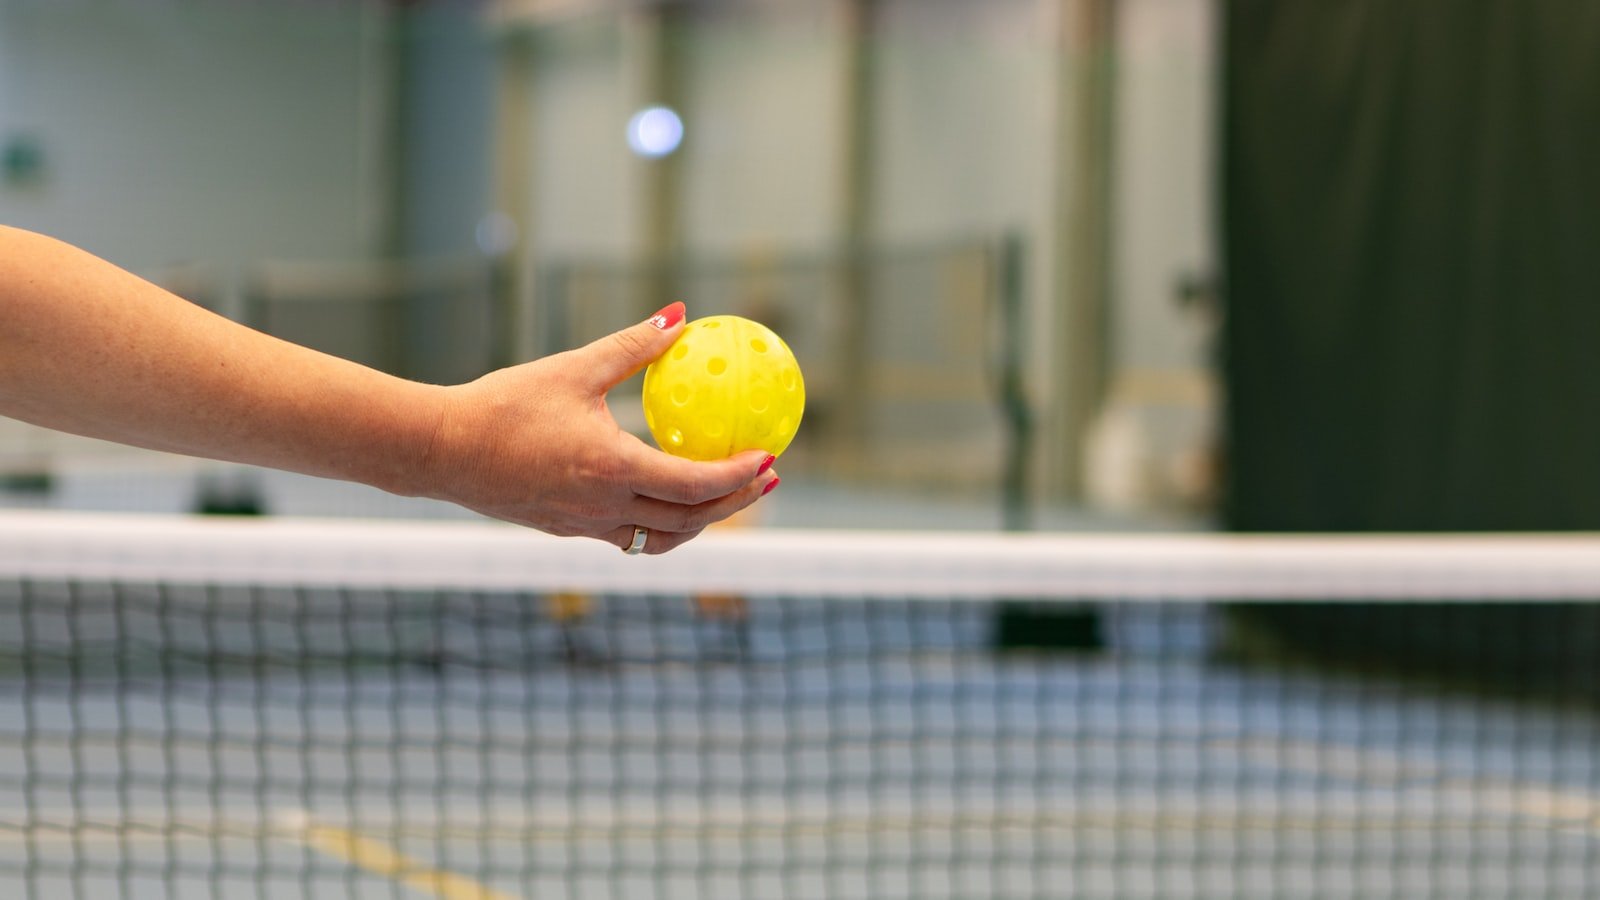 Respecting Your ‌Fellow Players: The Art of Good Sportsmanship in Pickleball